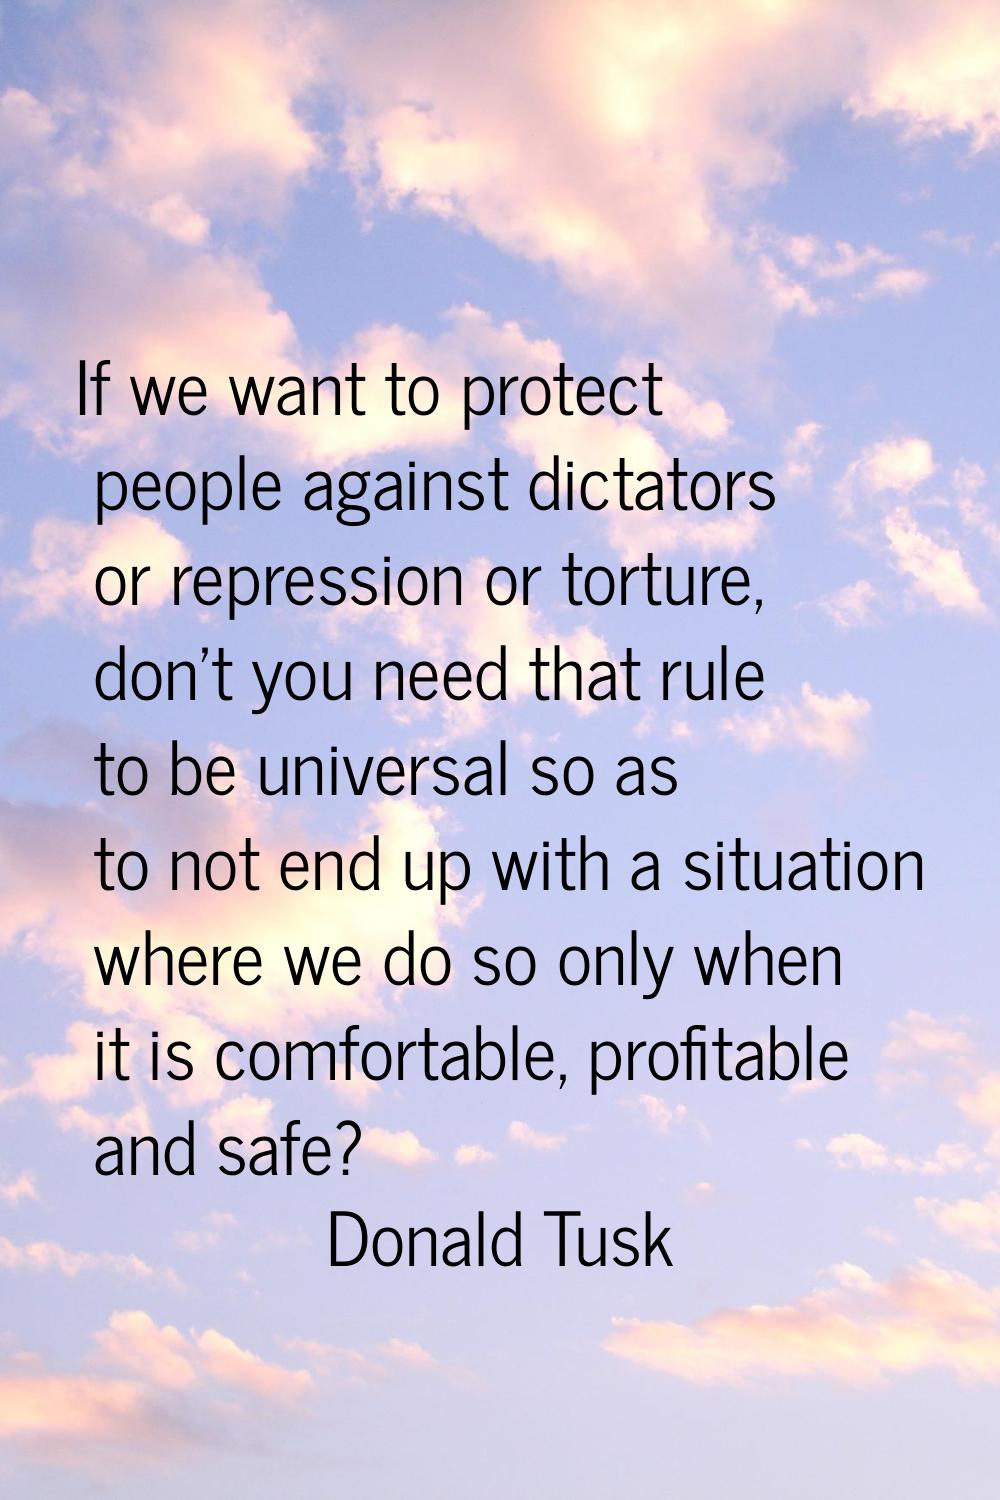 If we want to protect people against dictators or repression or torture, don't you need that rule t